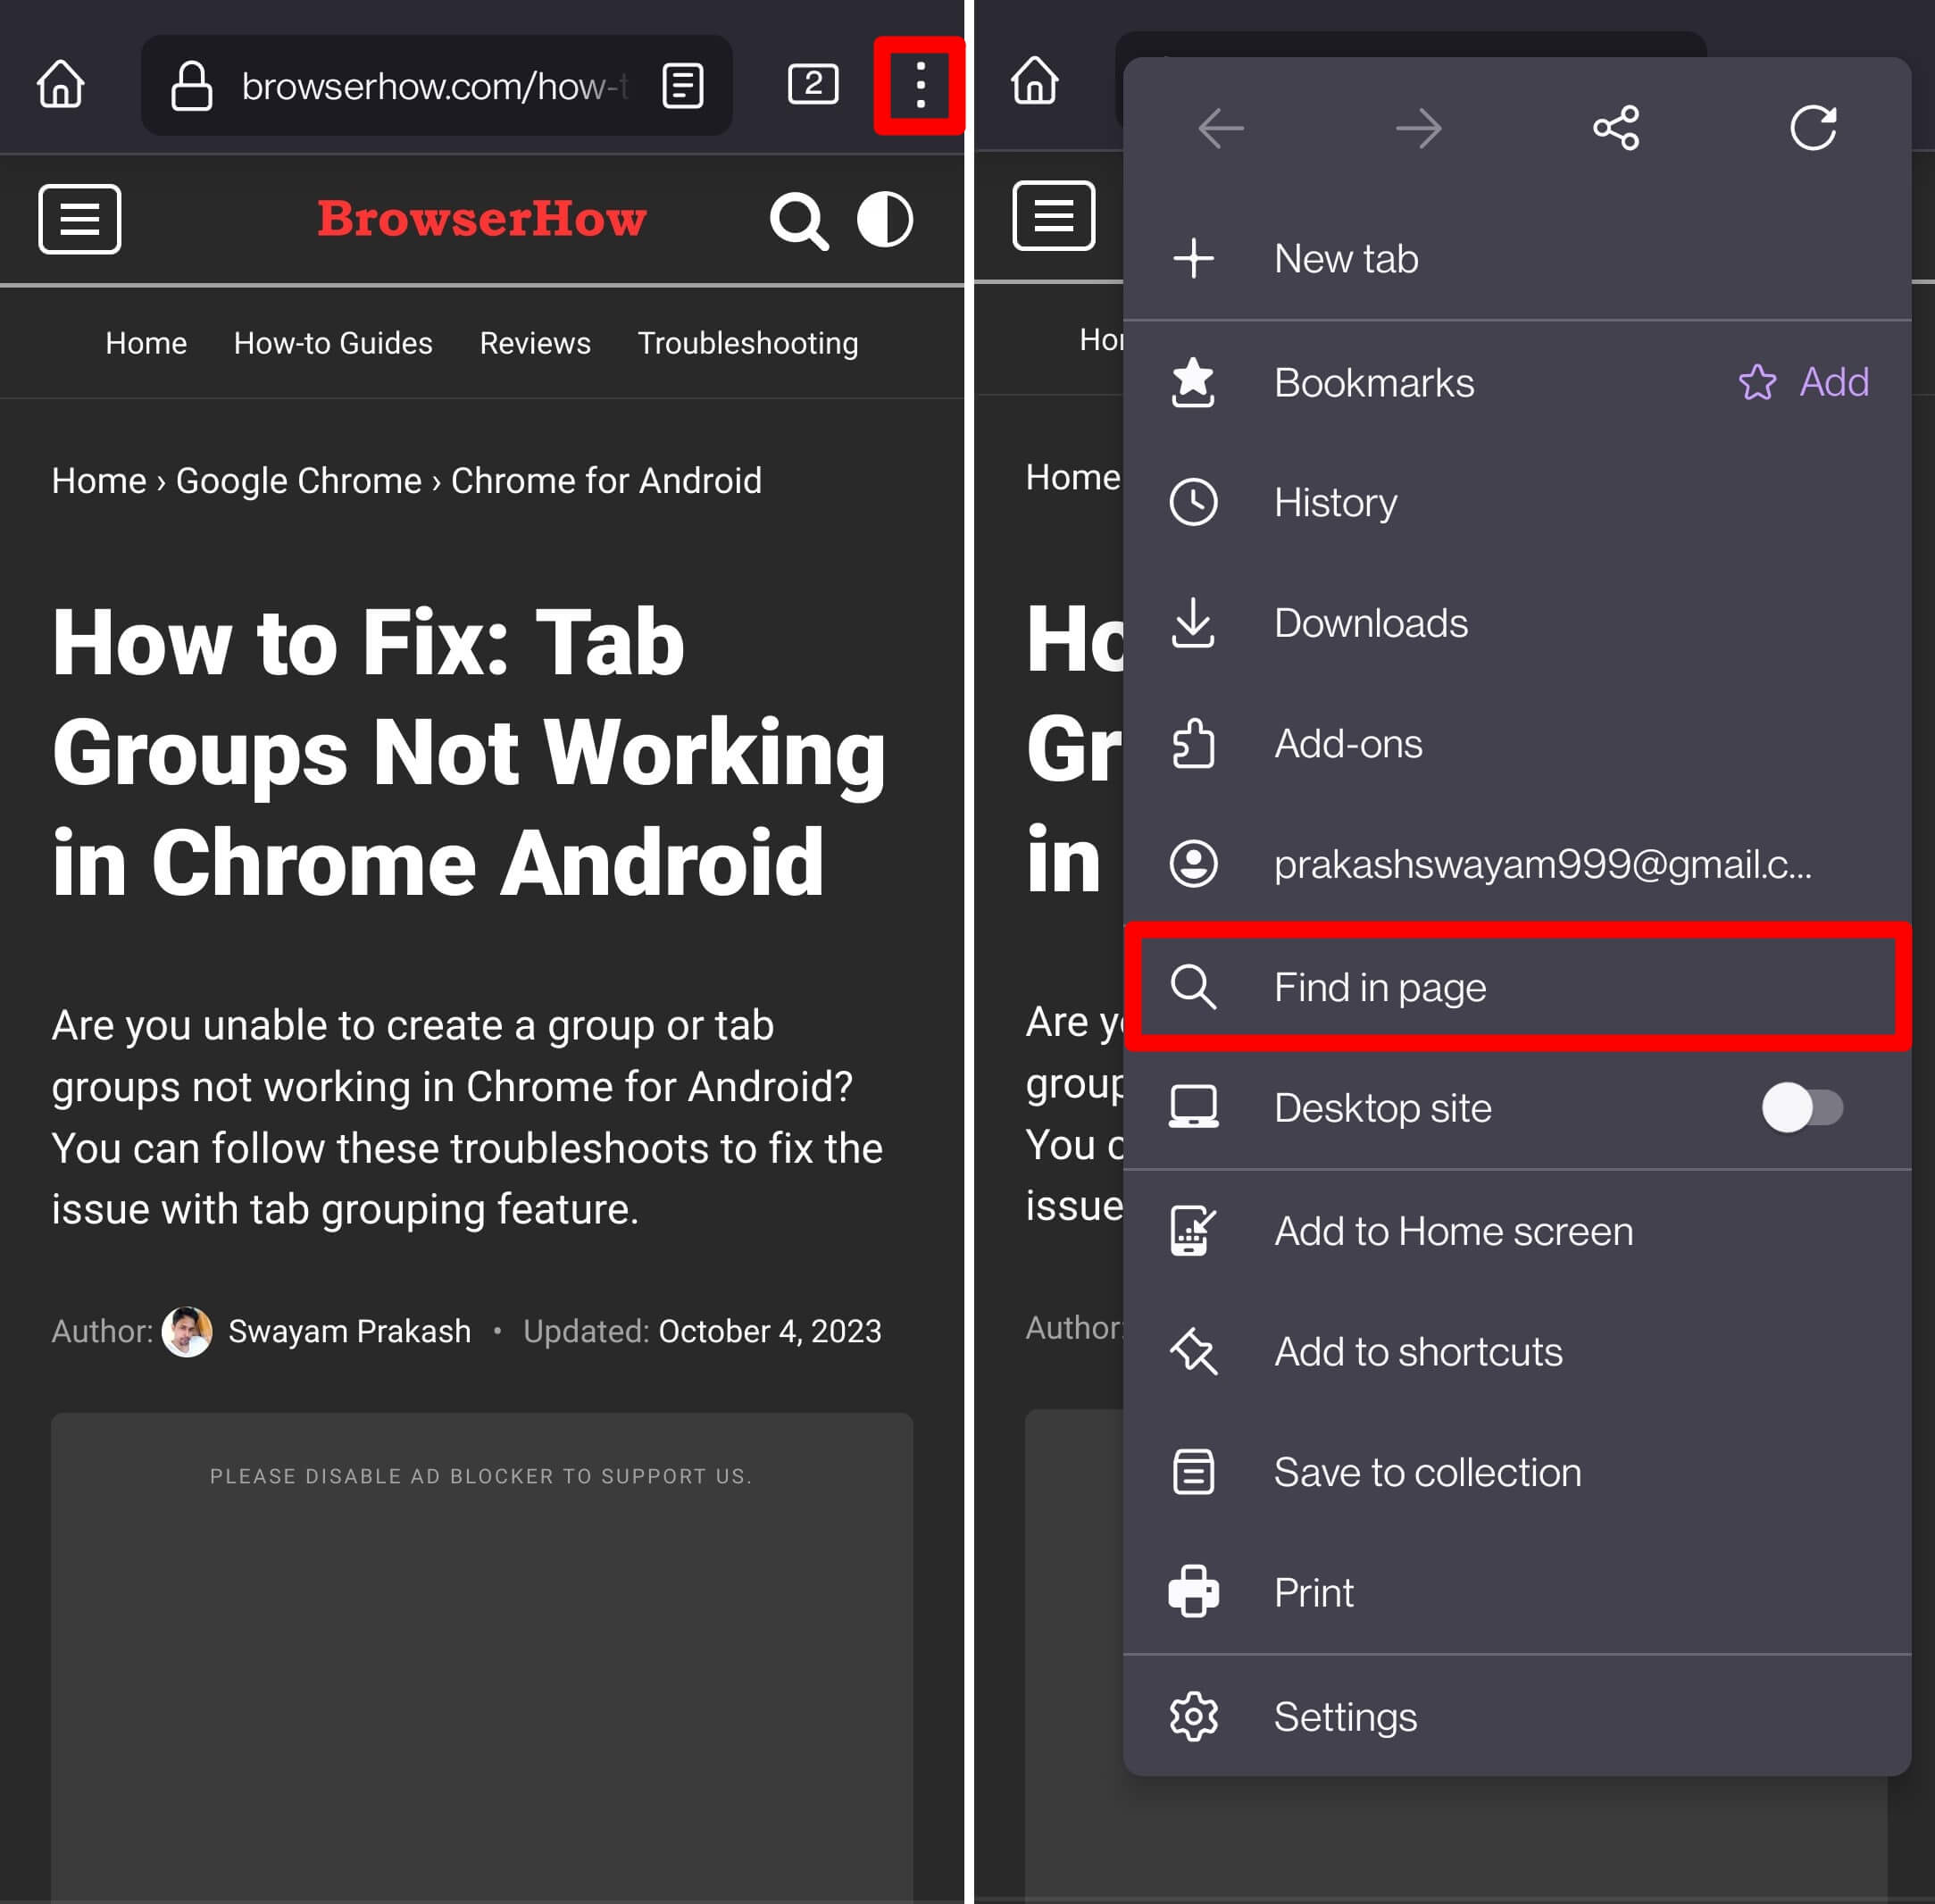 how to search and find on page in Firefox for Android